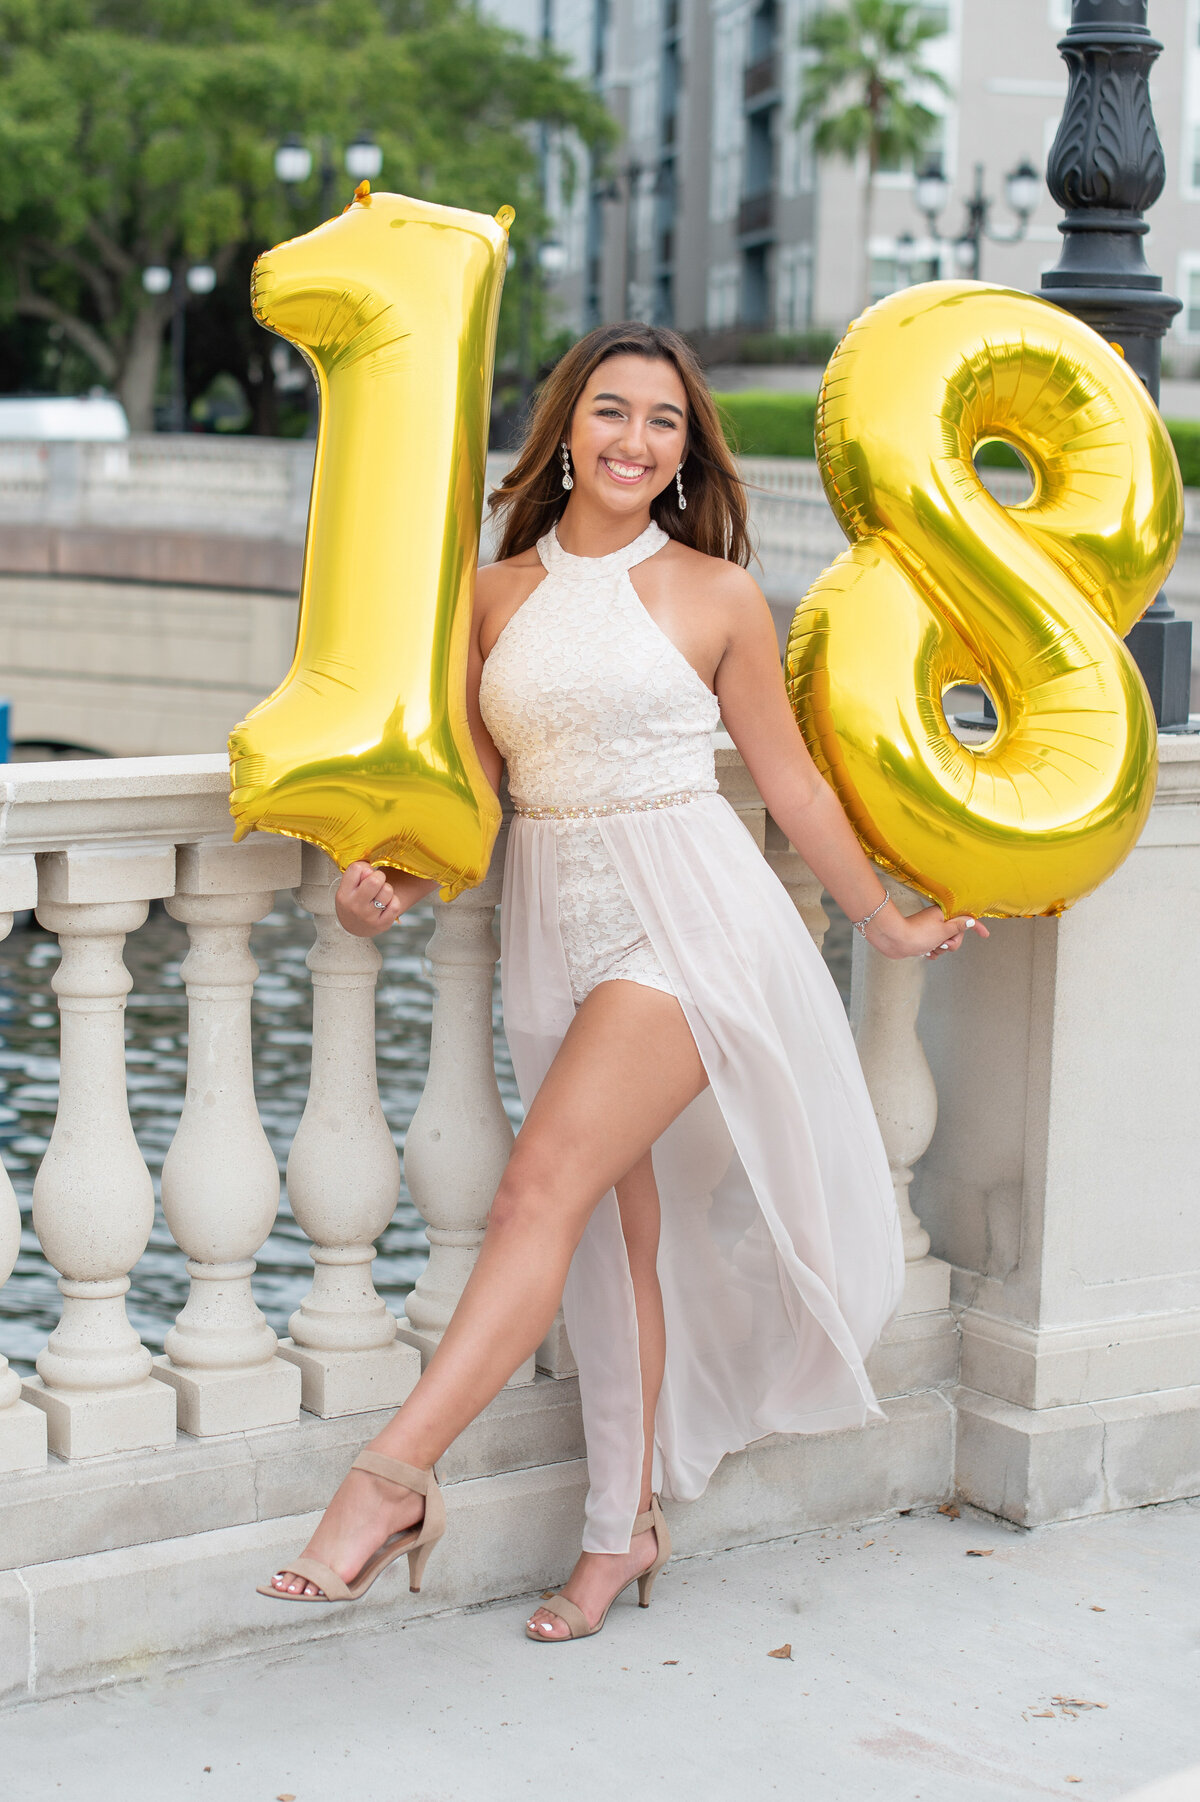 High school senior girl holding gold "18" balloons posing with leg kicked out.